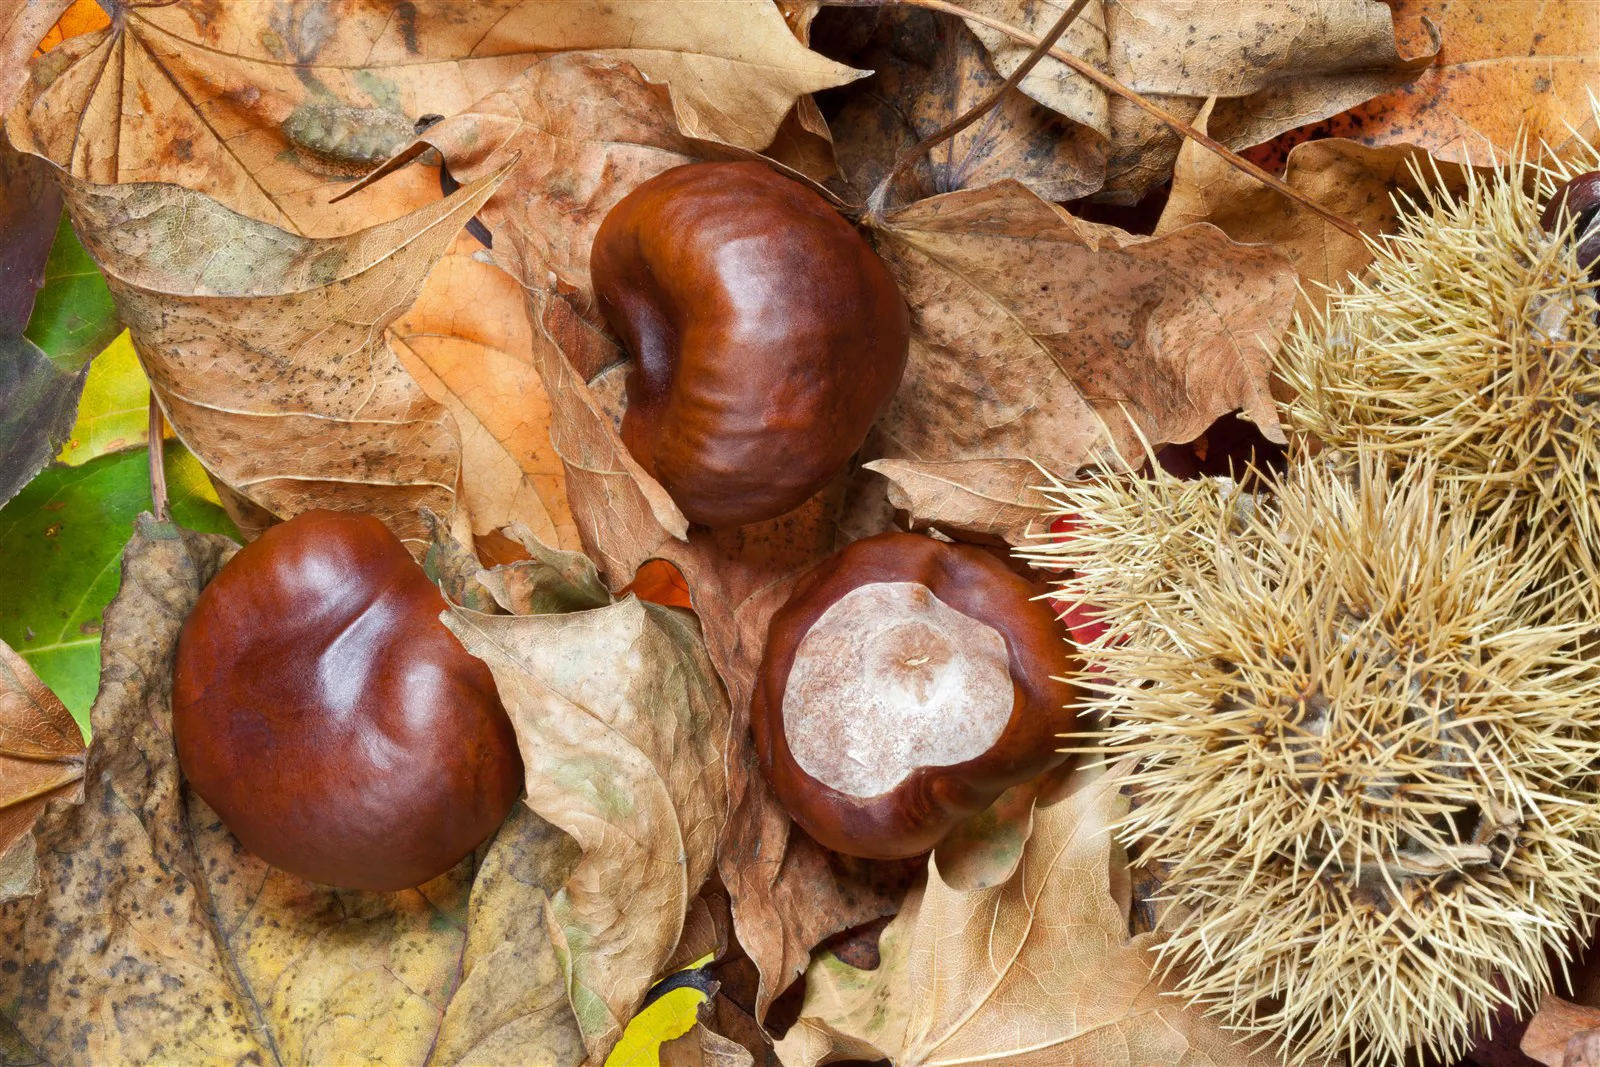 Conkers can be collected in autumn to play the conkers game